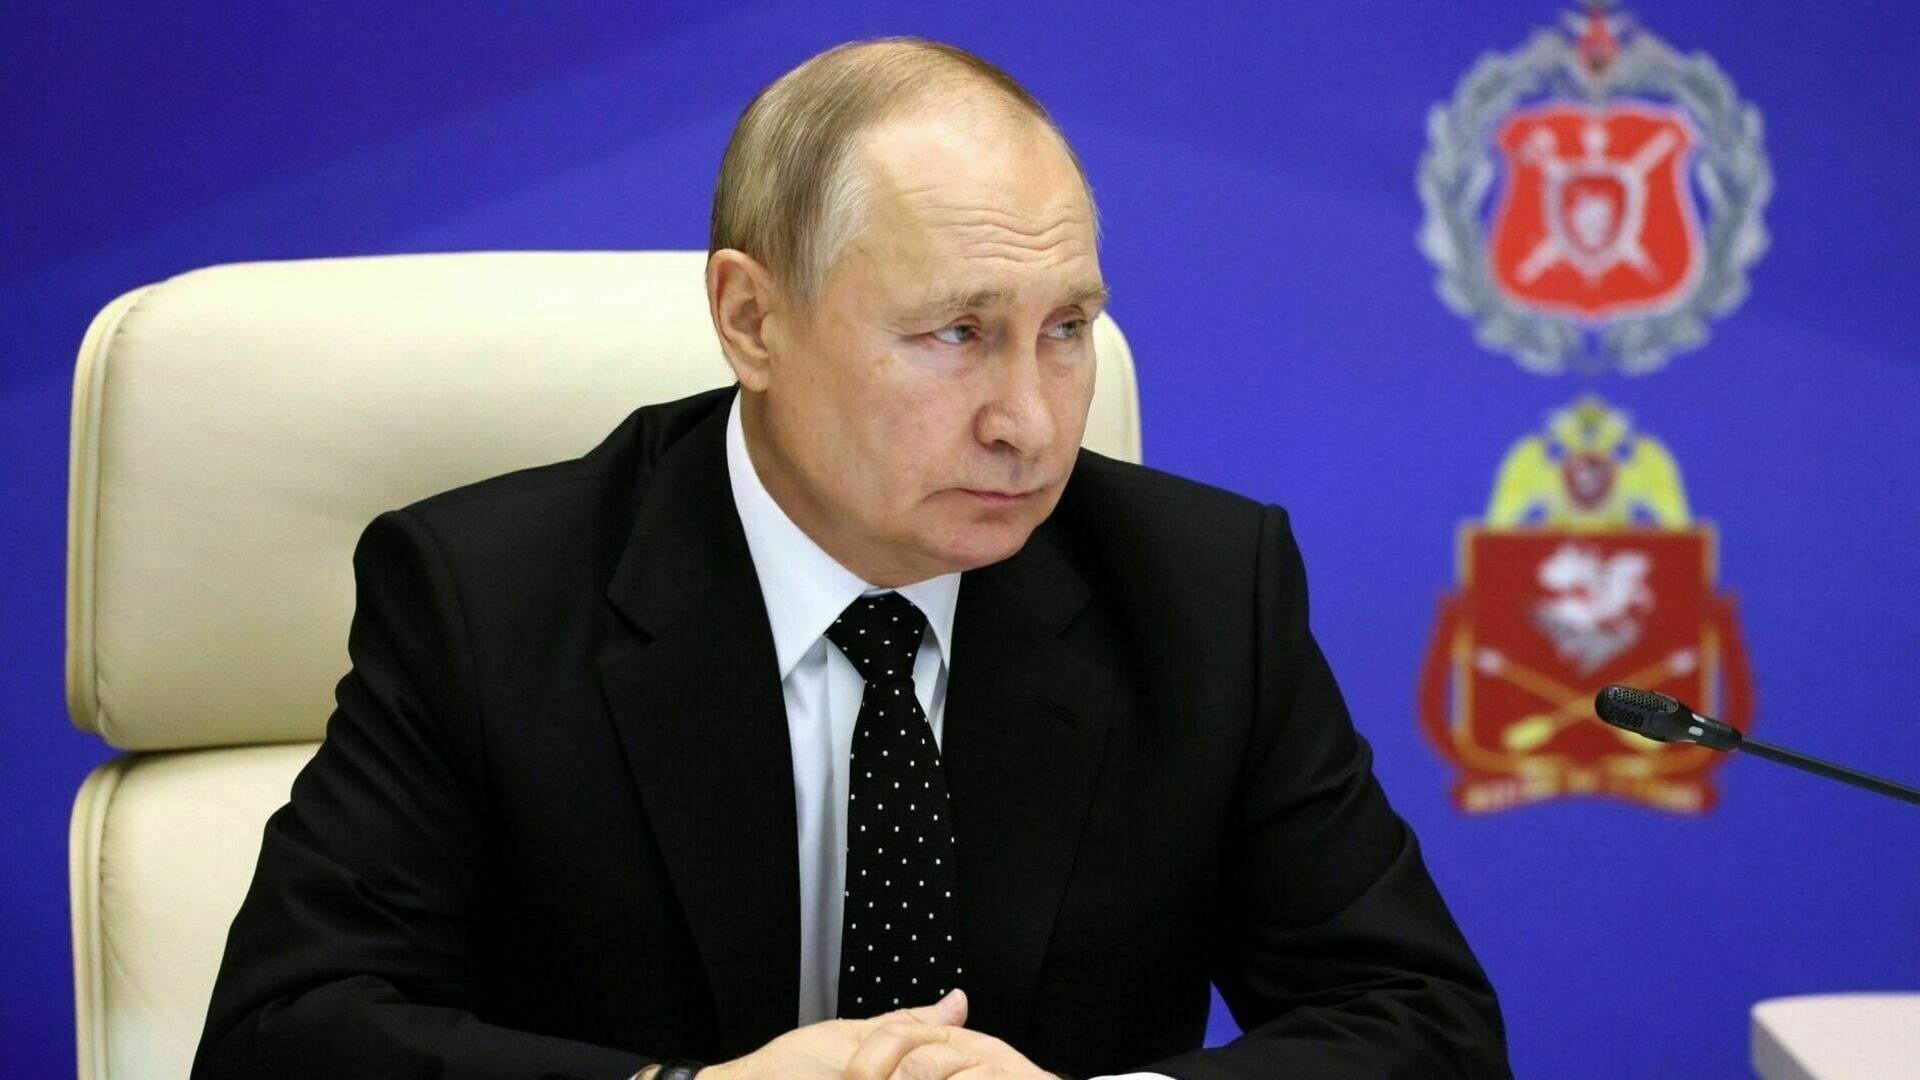 Putin: The US is "theoretically" interested in undermining the "Northern Streams"